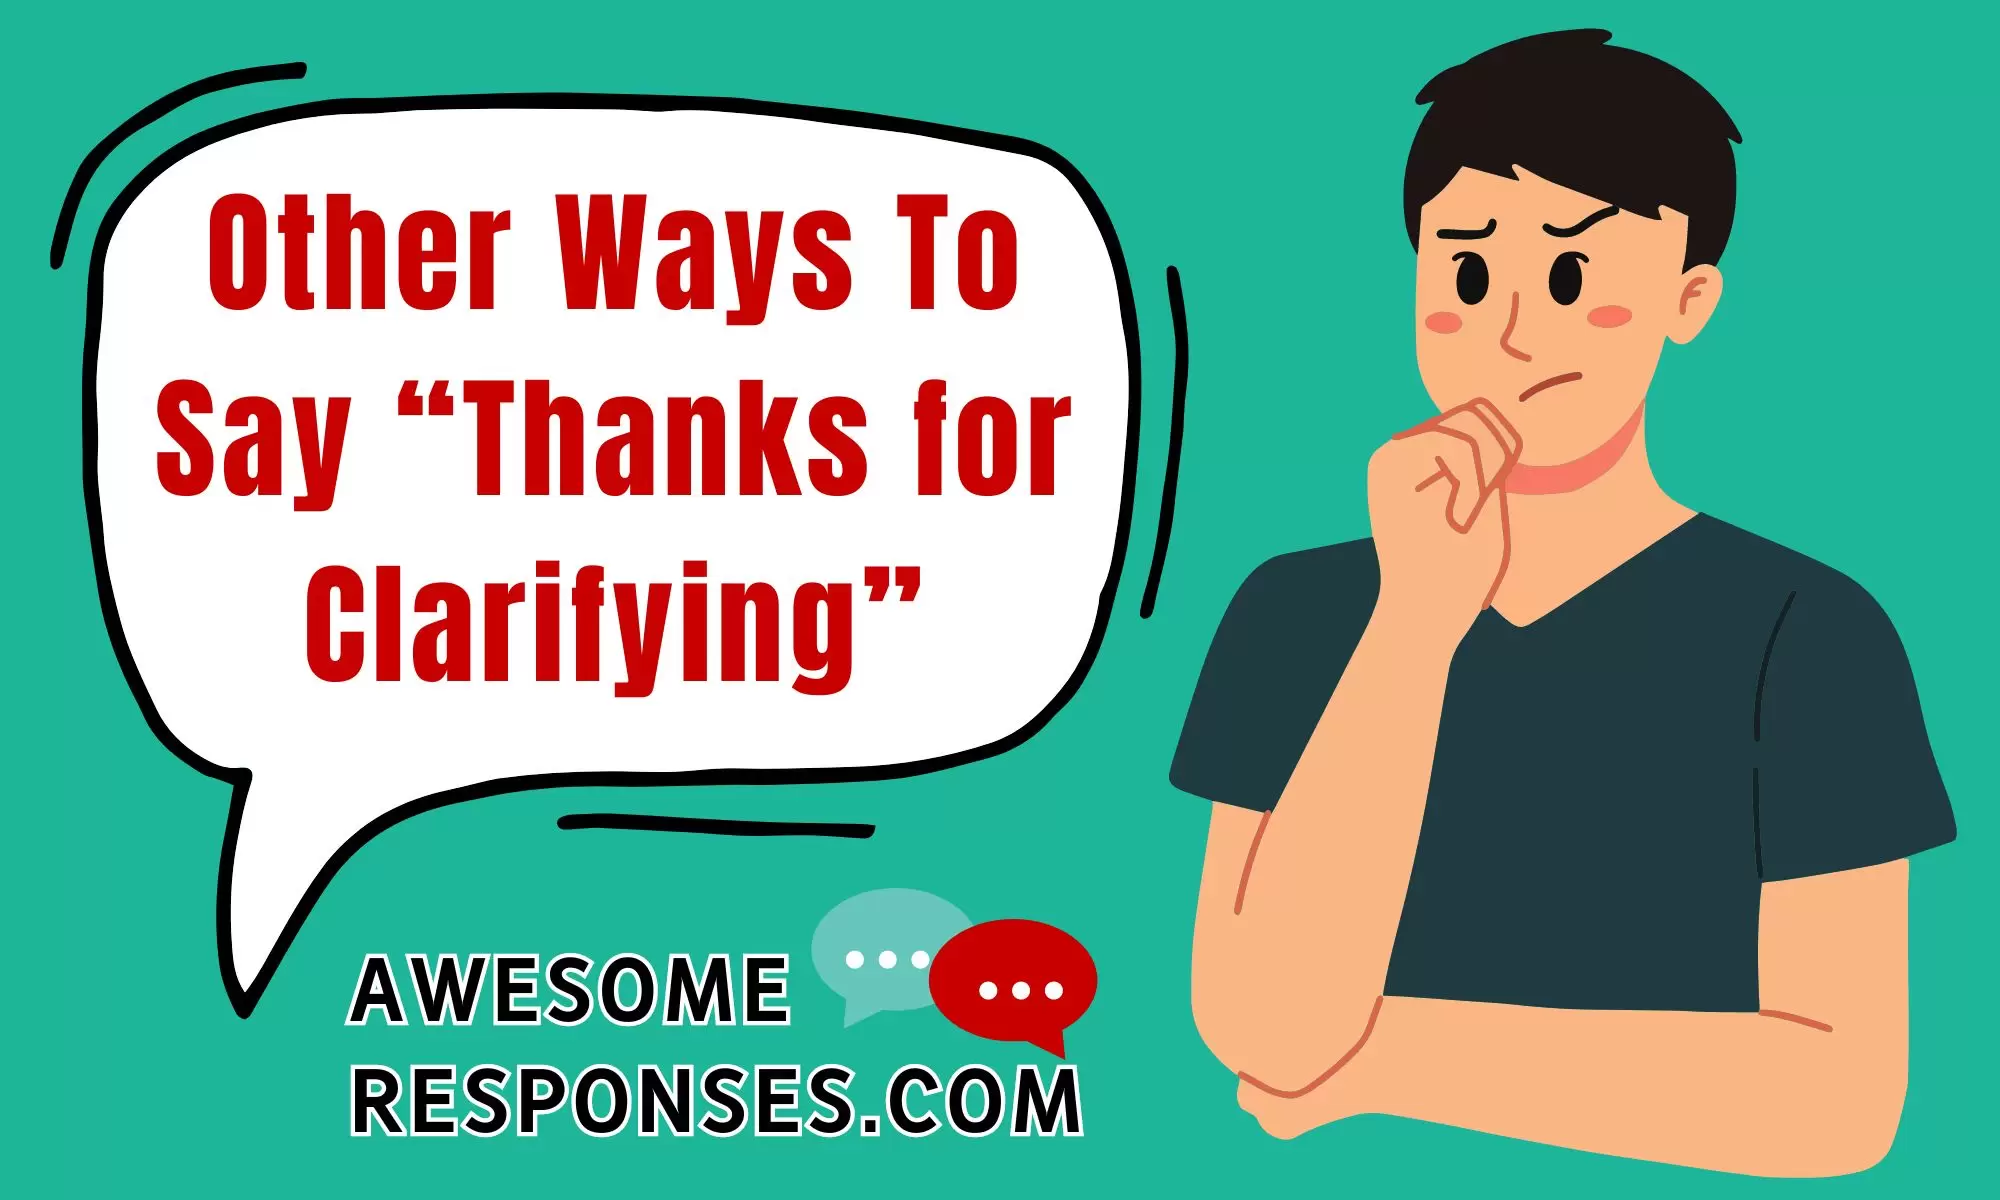 Other Ways To Say “Thanks for Clarifying”